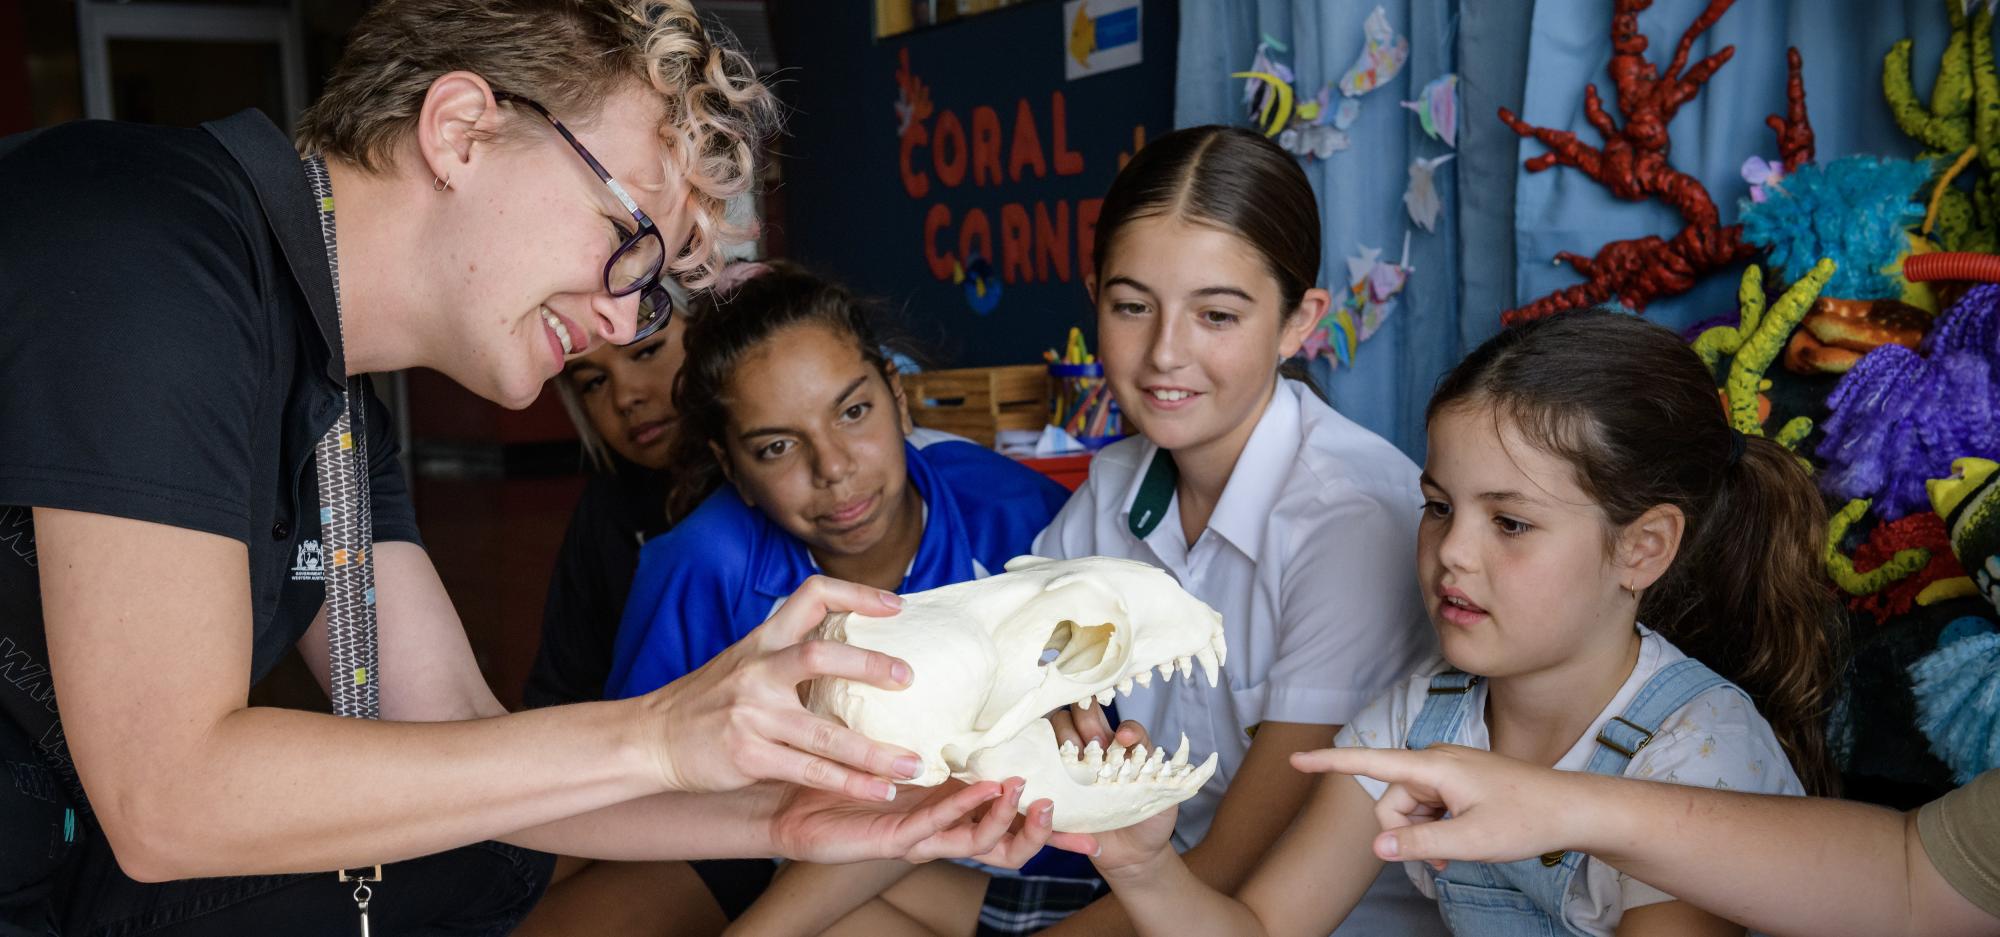 A person with short curly blonde hair and black glasses wears a black Museum uniform and smiles as they hold a white skull model up for school children to look at. The children sit cross legged and touch and point to the skull as though with interest